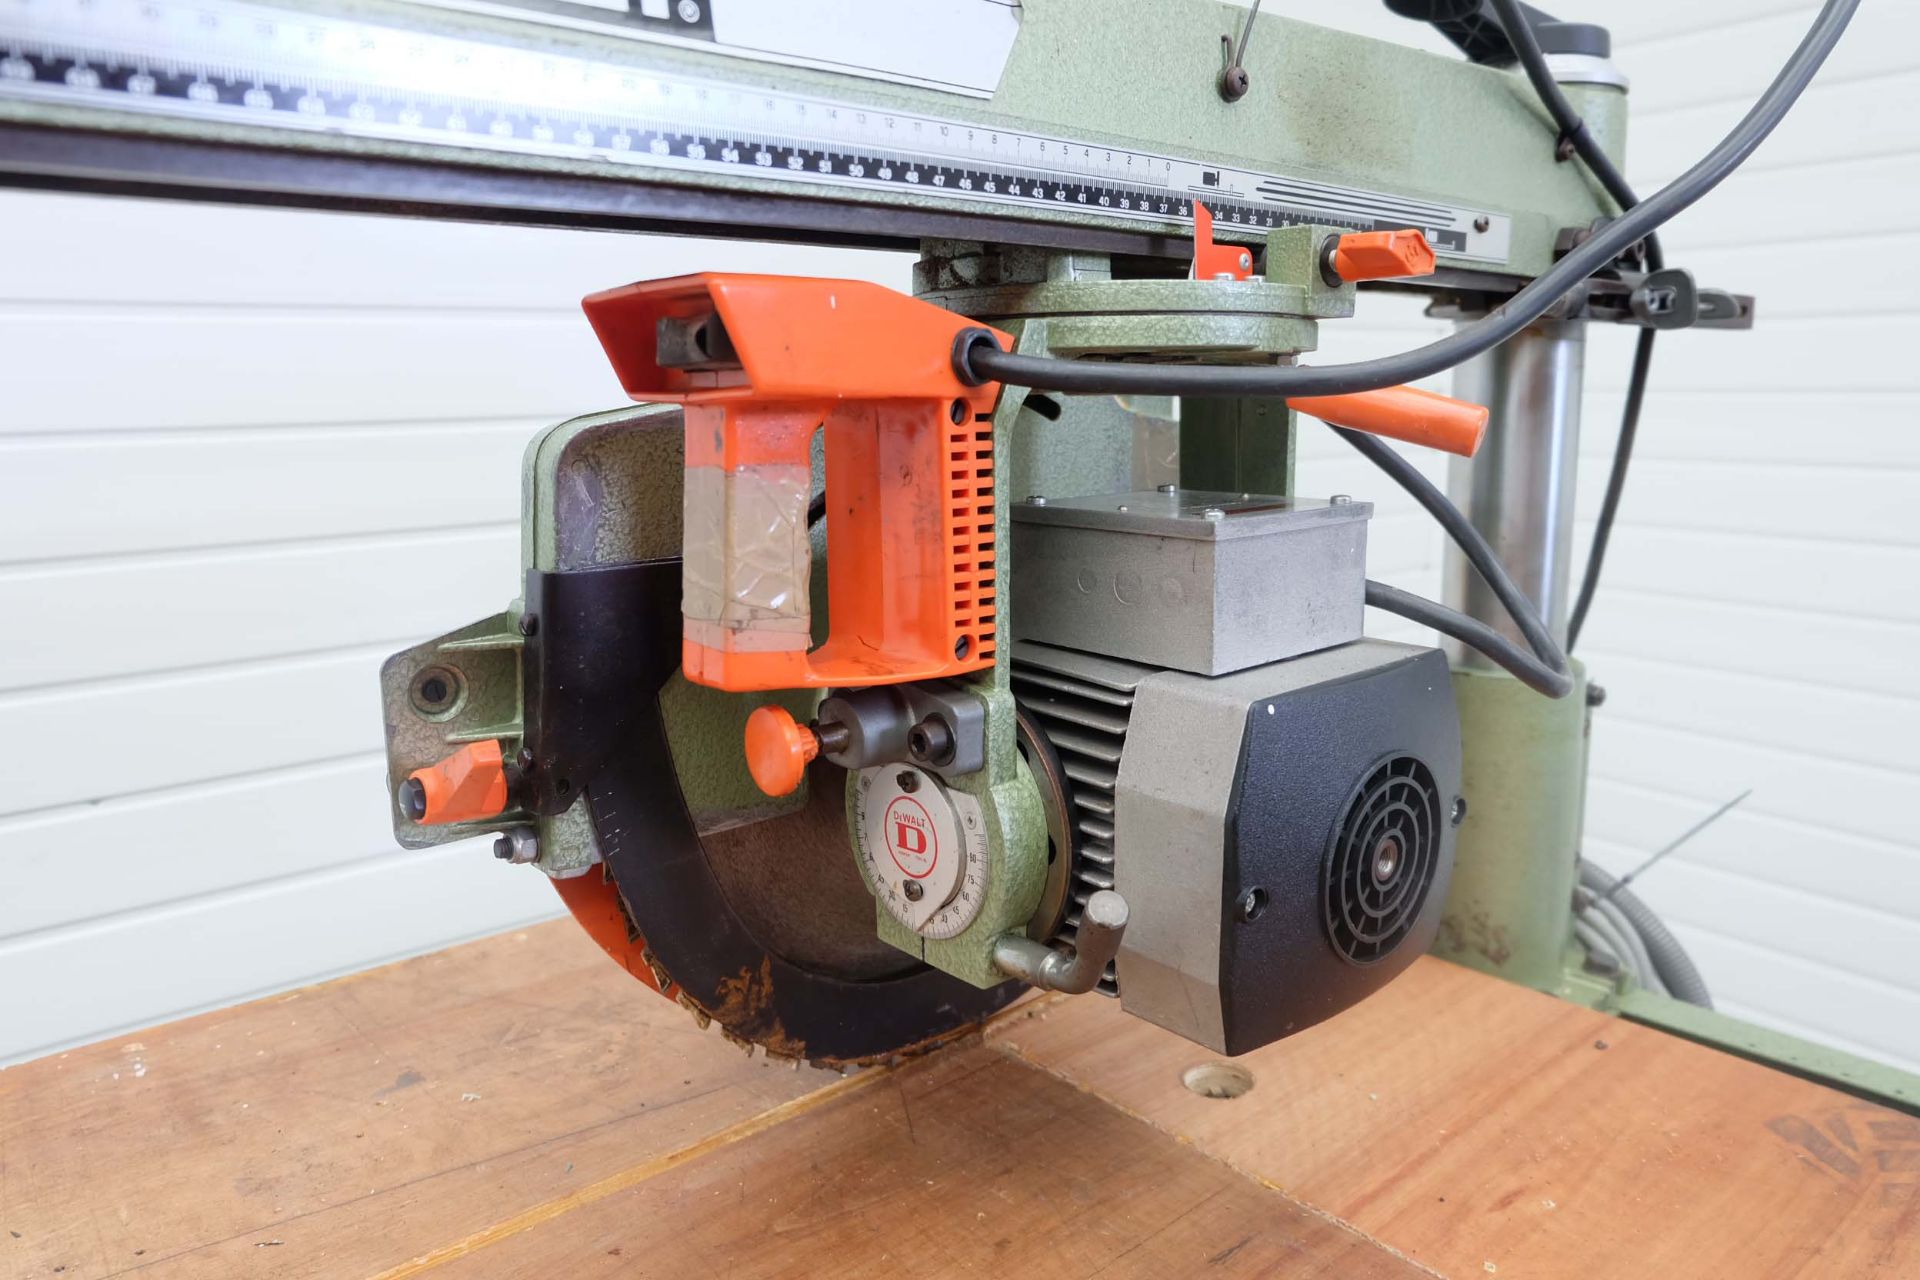 DeWalt Model DW8003 Radial Arm Saw. Motor 3 Phase, 2.2kW, 3Hp. Made in Italy - Image 4 of 8